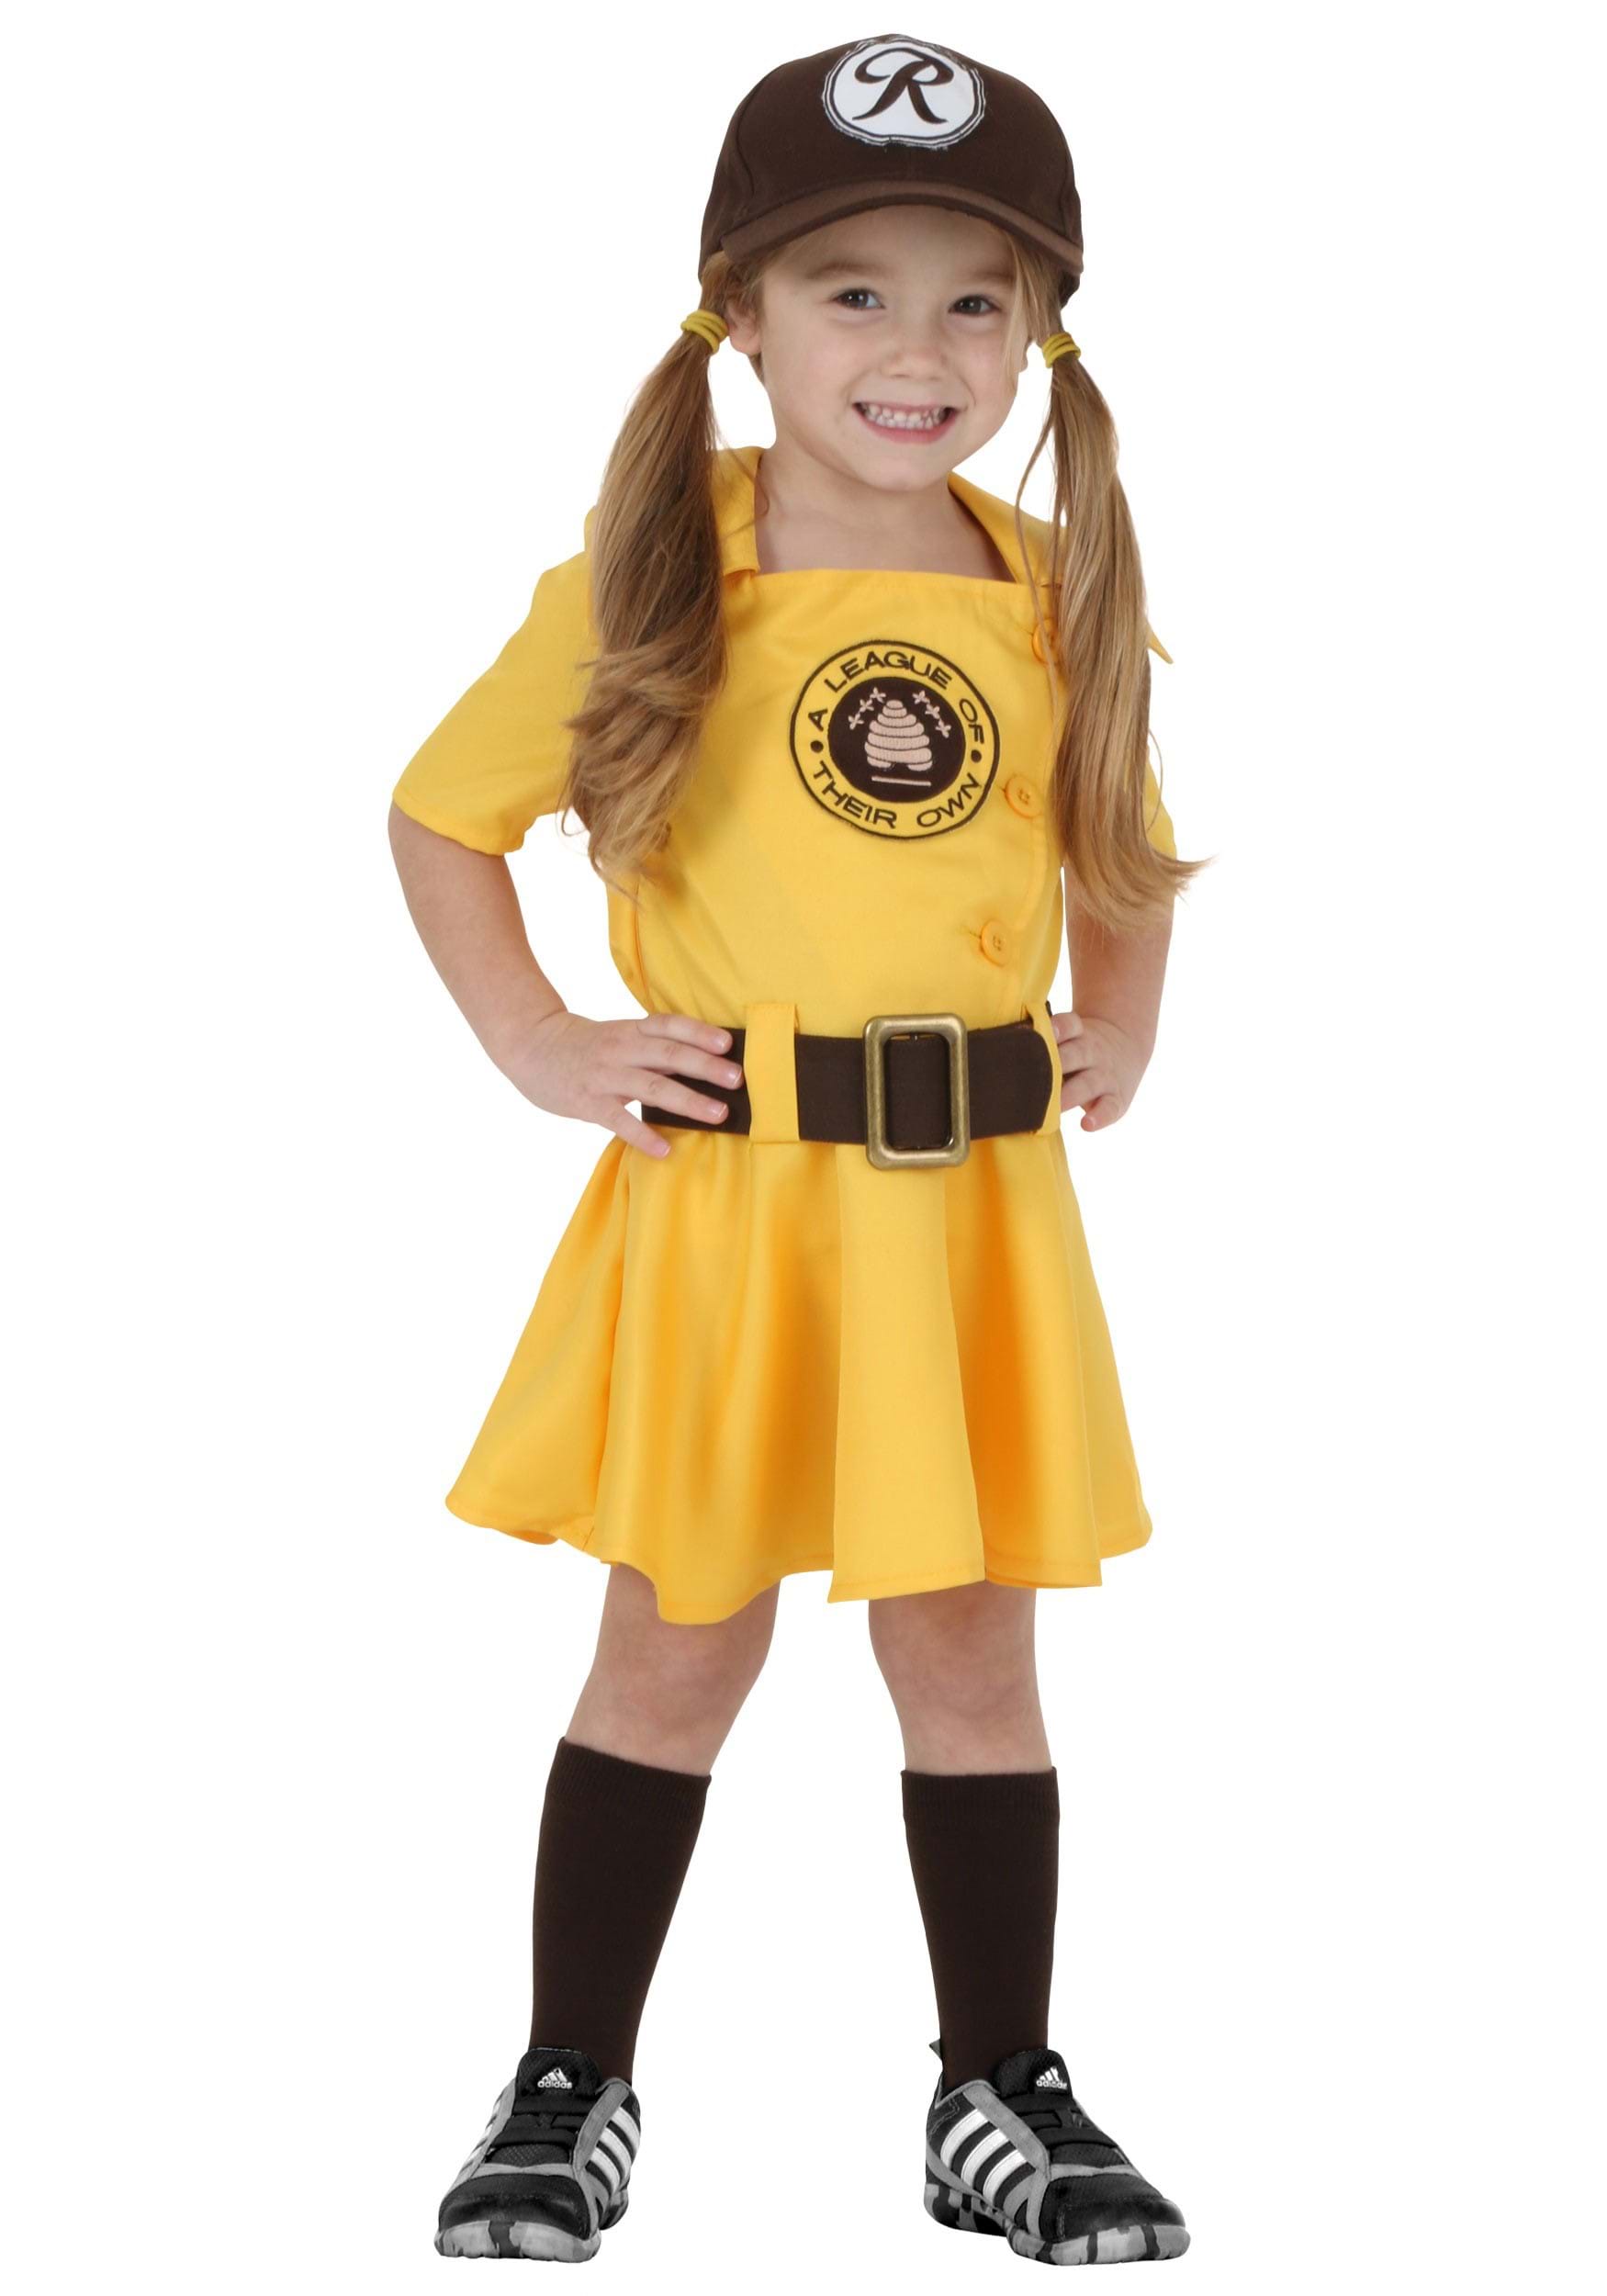 Photos - Fancy Dress Toddler FUN Costumes  Kit Costume from A League of Their Own Brown/Oran 